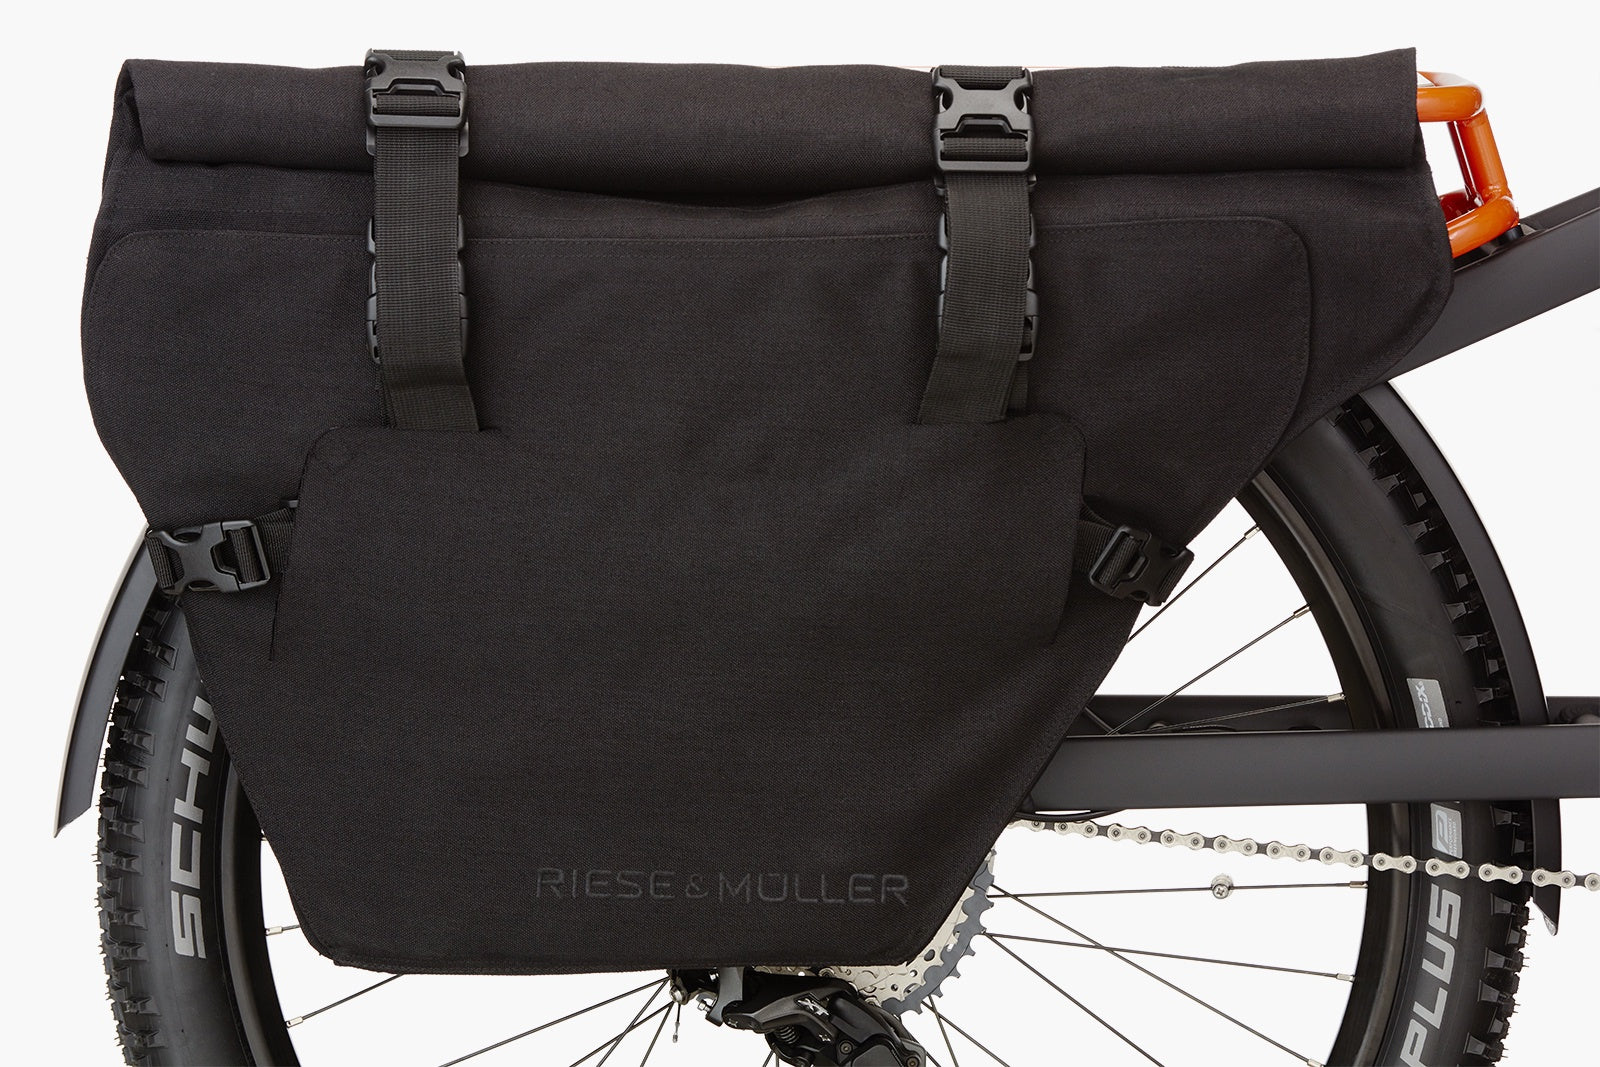 Riese & Müller Multicharger Cargo bags